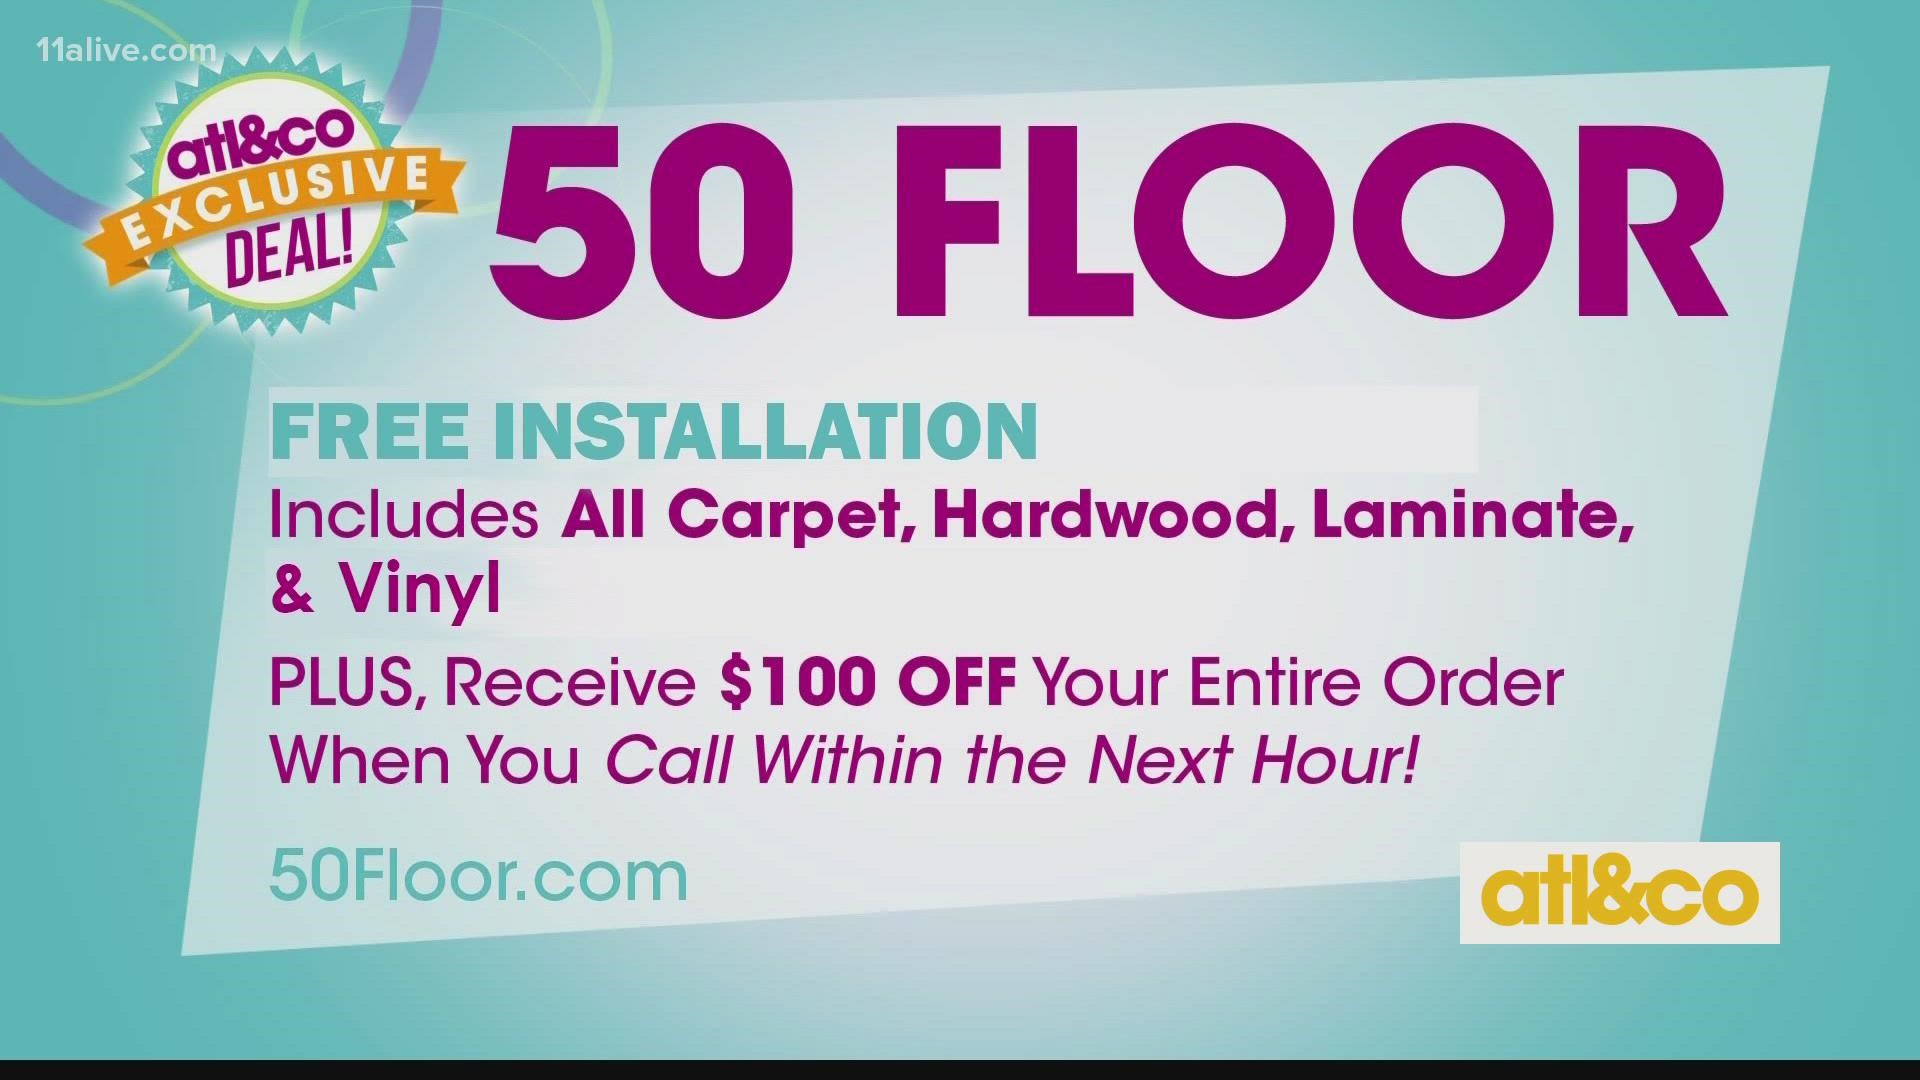 Get free installation and $100 off your entire order with the pros at 50 Floor.